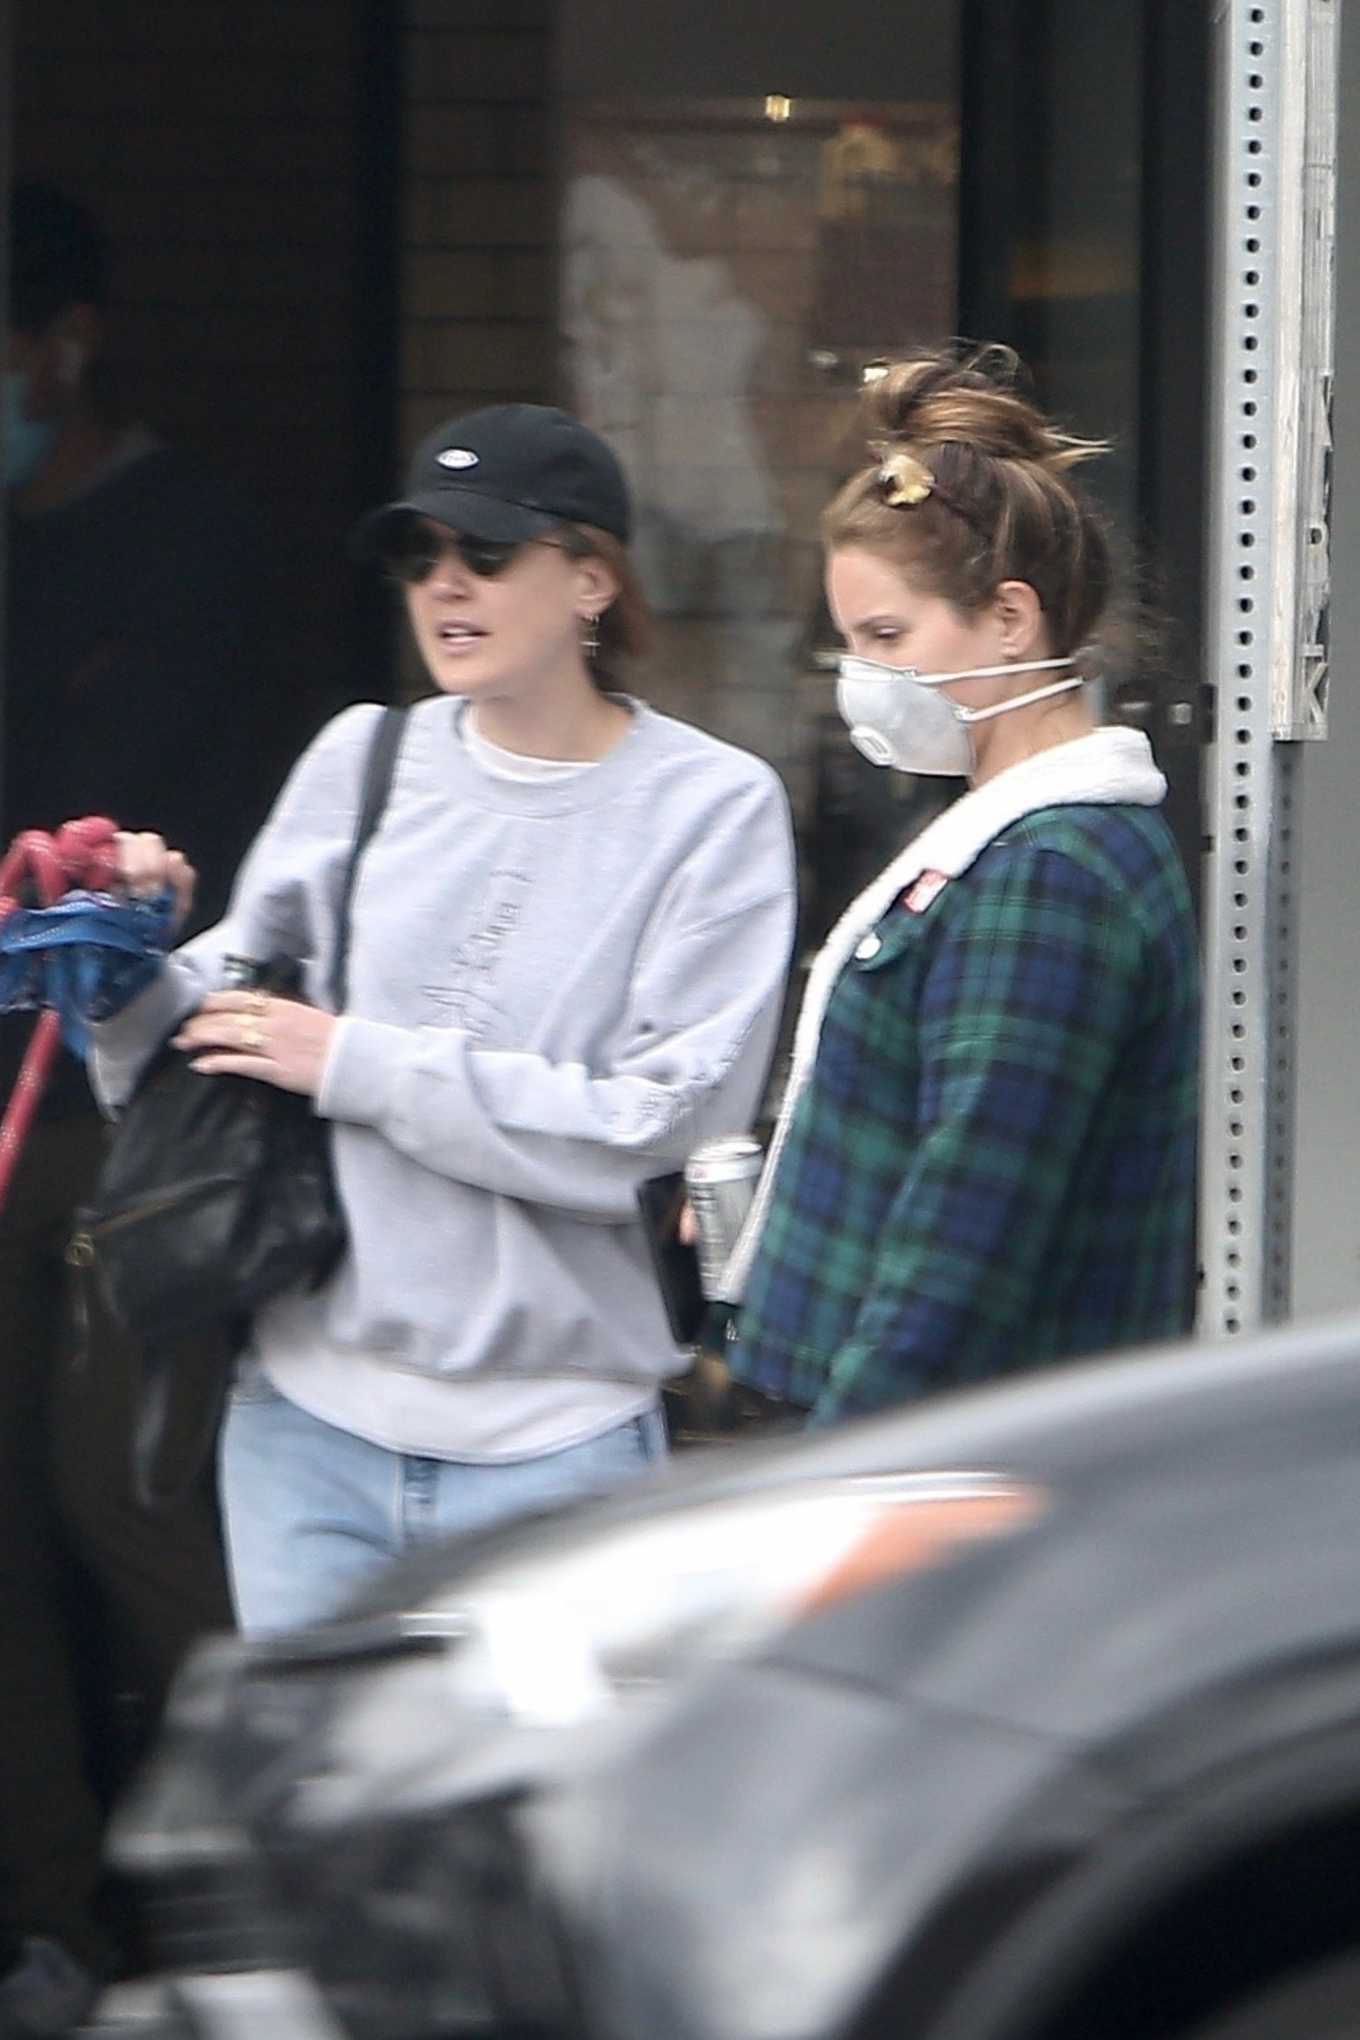 Lana Del Rey â€“ Wear mask while out in Los Angeles